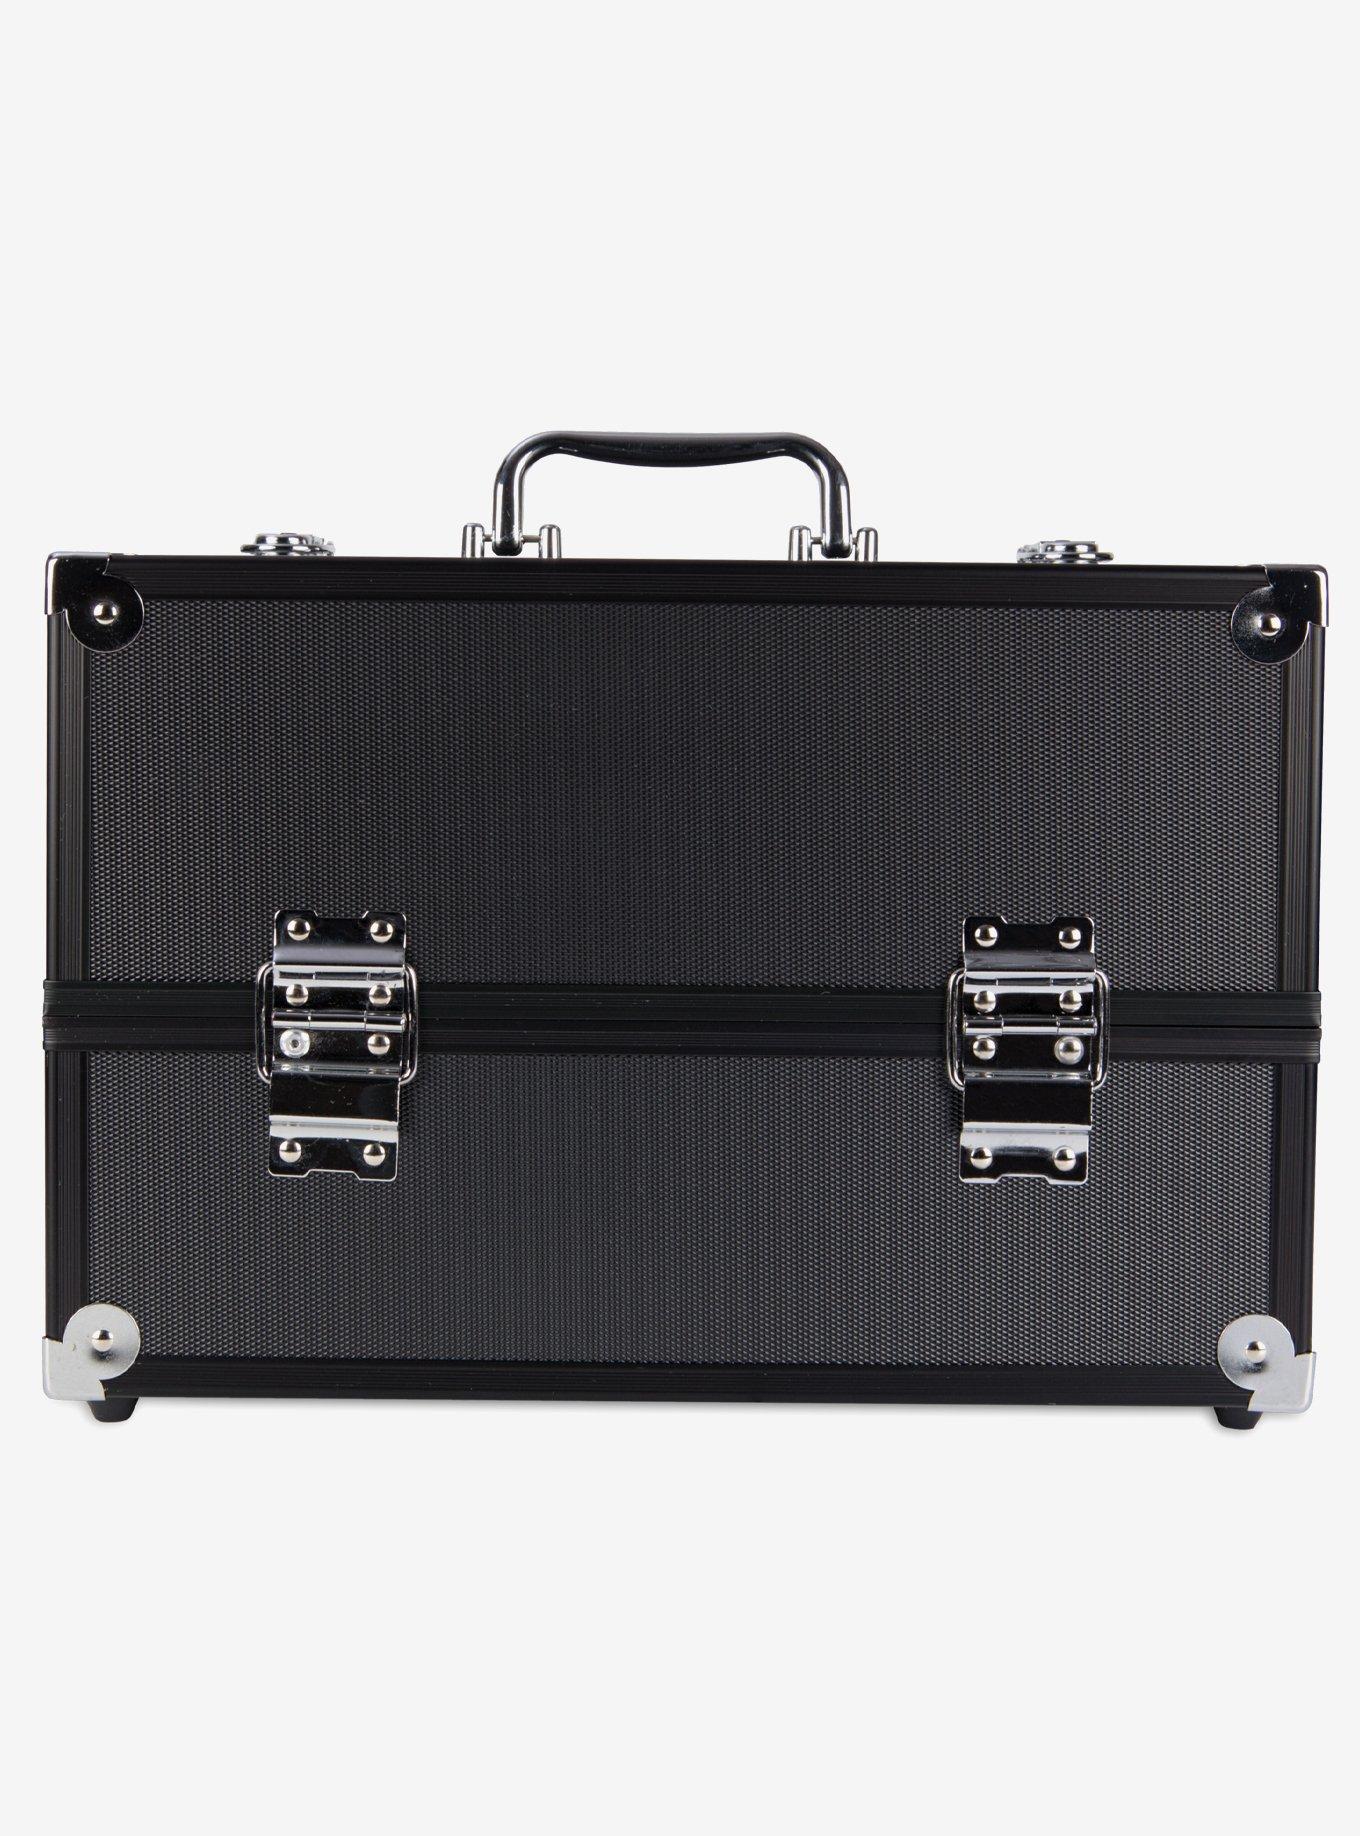 Caboodles Makeup Case ONLY $10 Shipped!